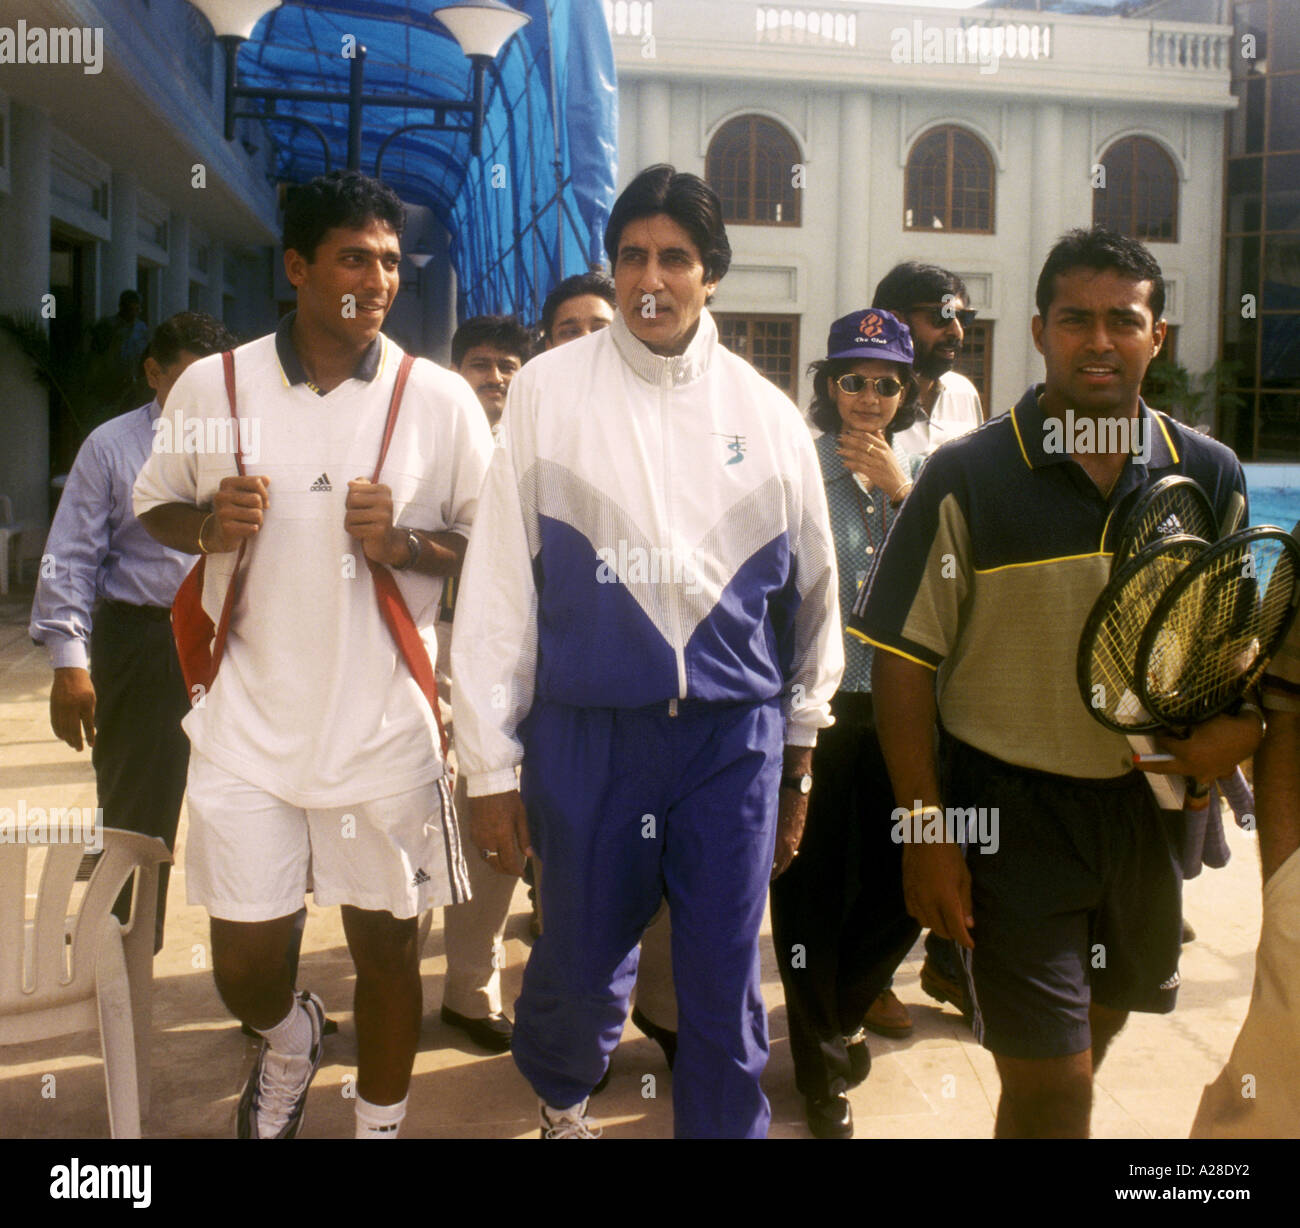 Indian Bollywood Film Star Actor Amitabh Bachchan with tennis champions Mahesh Bhupathi and Leander Paes Stock Photo